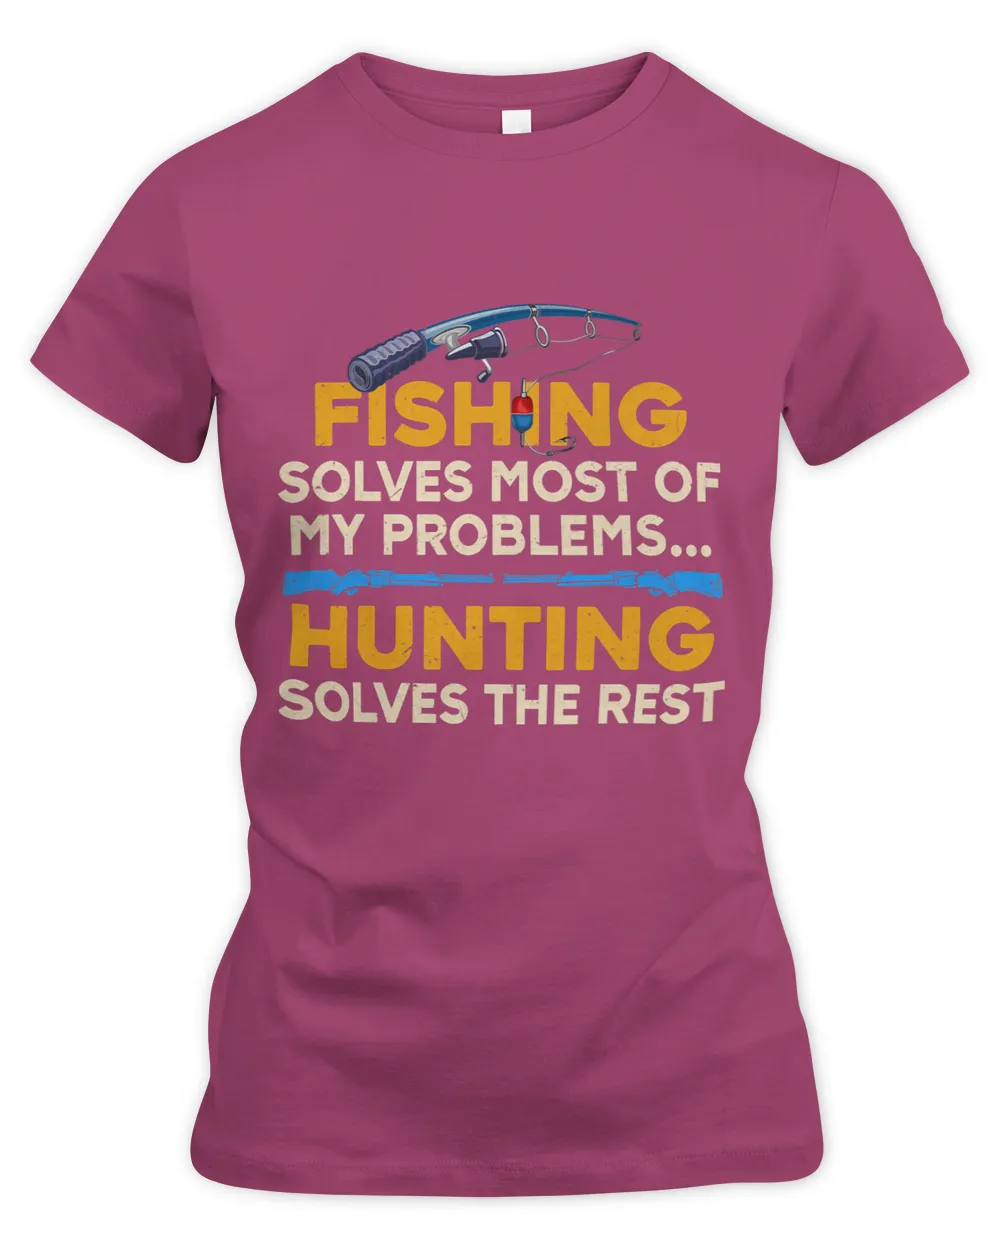 Tee For Men Hunters And Fishermen Funny Fishing Hunting